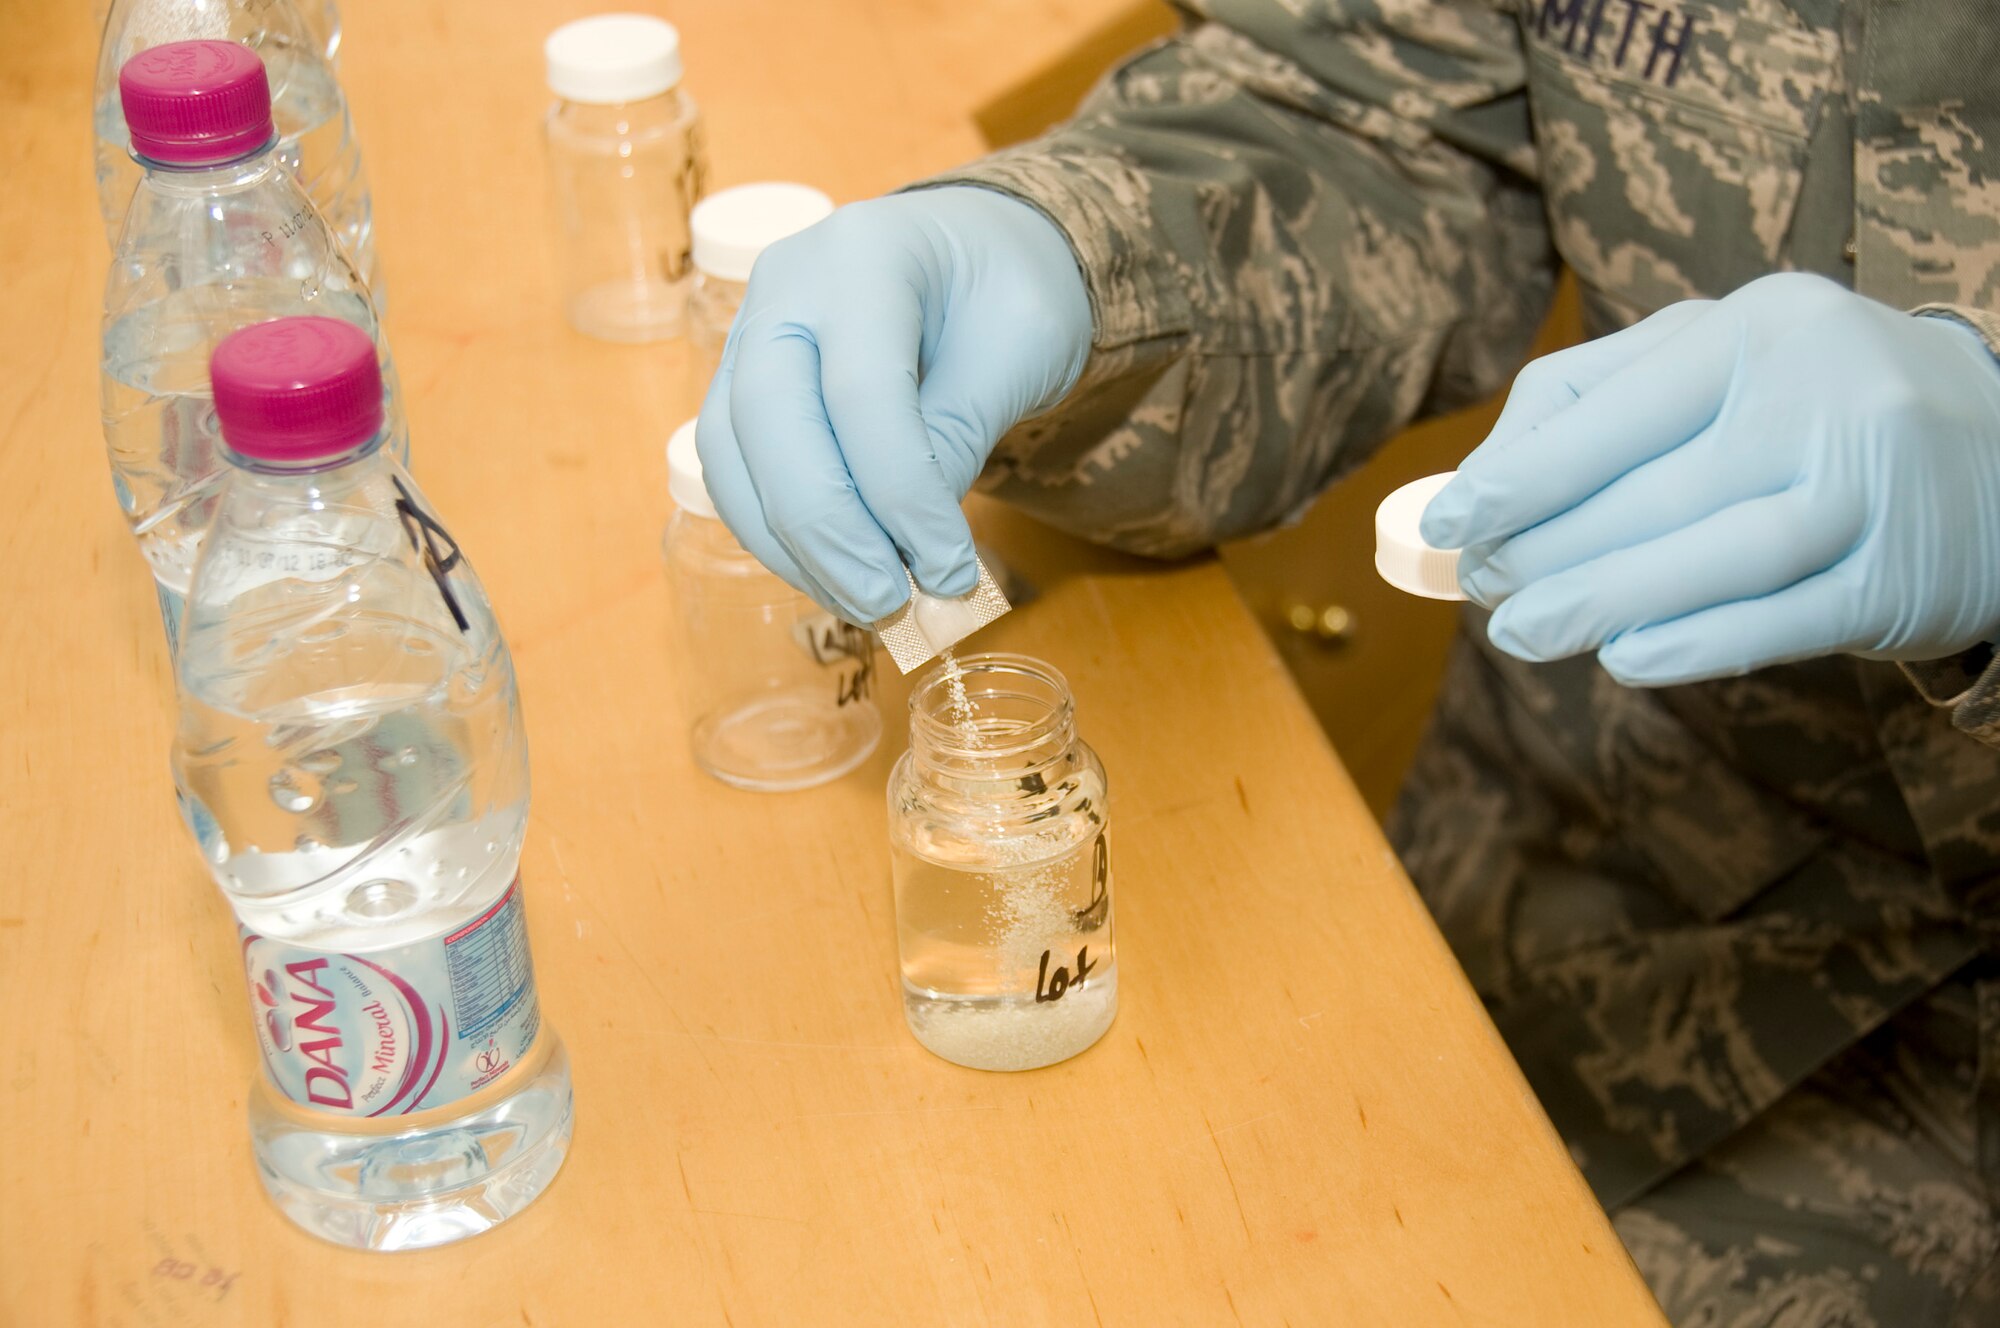 Senior Airman Ryan Smith, 379th Expeditionary Medical Group Bioenvironmental environmental program manager, pours agar into a pulled sample of water July 20, 2012 here. The test is conducted to ensure no bacteria or ecoli is found in the bottled water. Smith ensures all water consumed by service members here adheres to Air Force Central standards. (U.S. Air Force photo/Senior Airman Bryan Swink)